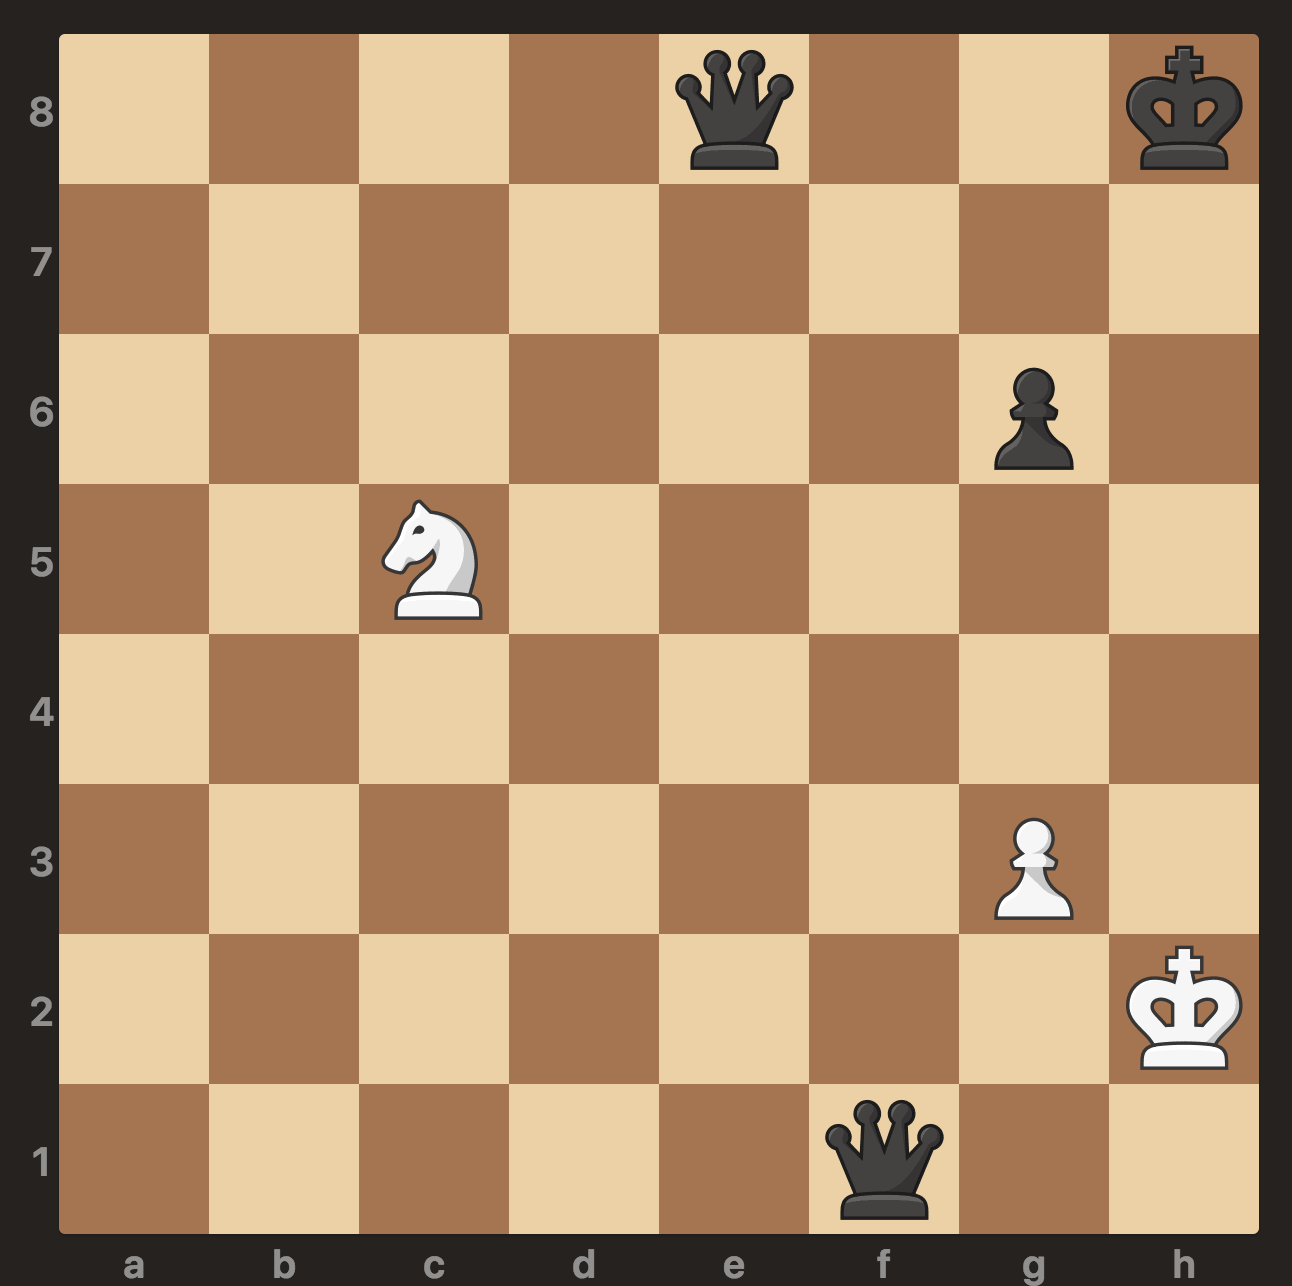 How to STOP the 4 move checkmate - 2 ways to prevent it! 